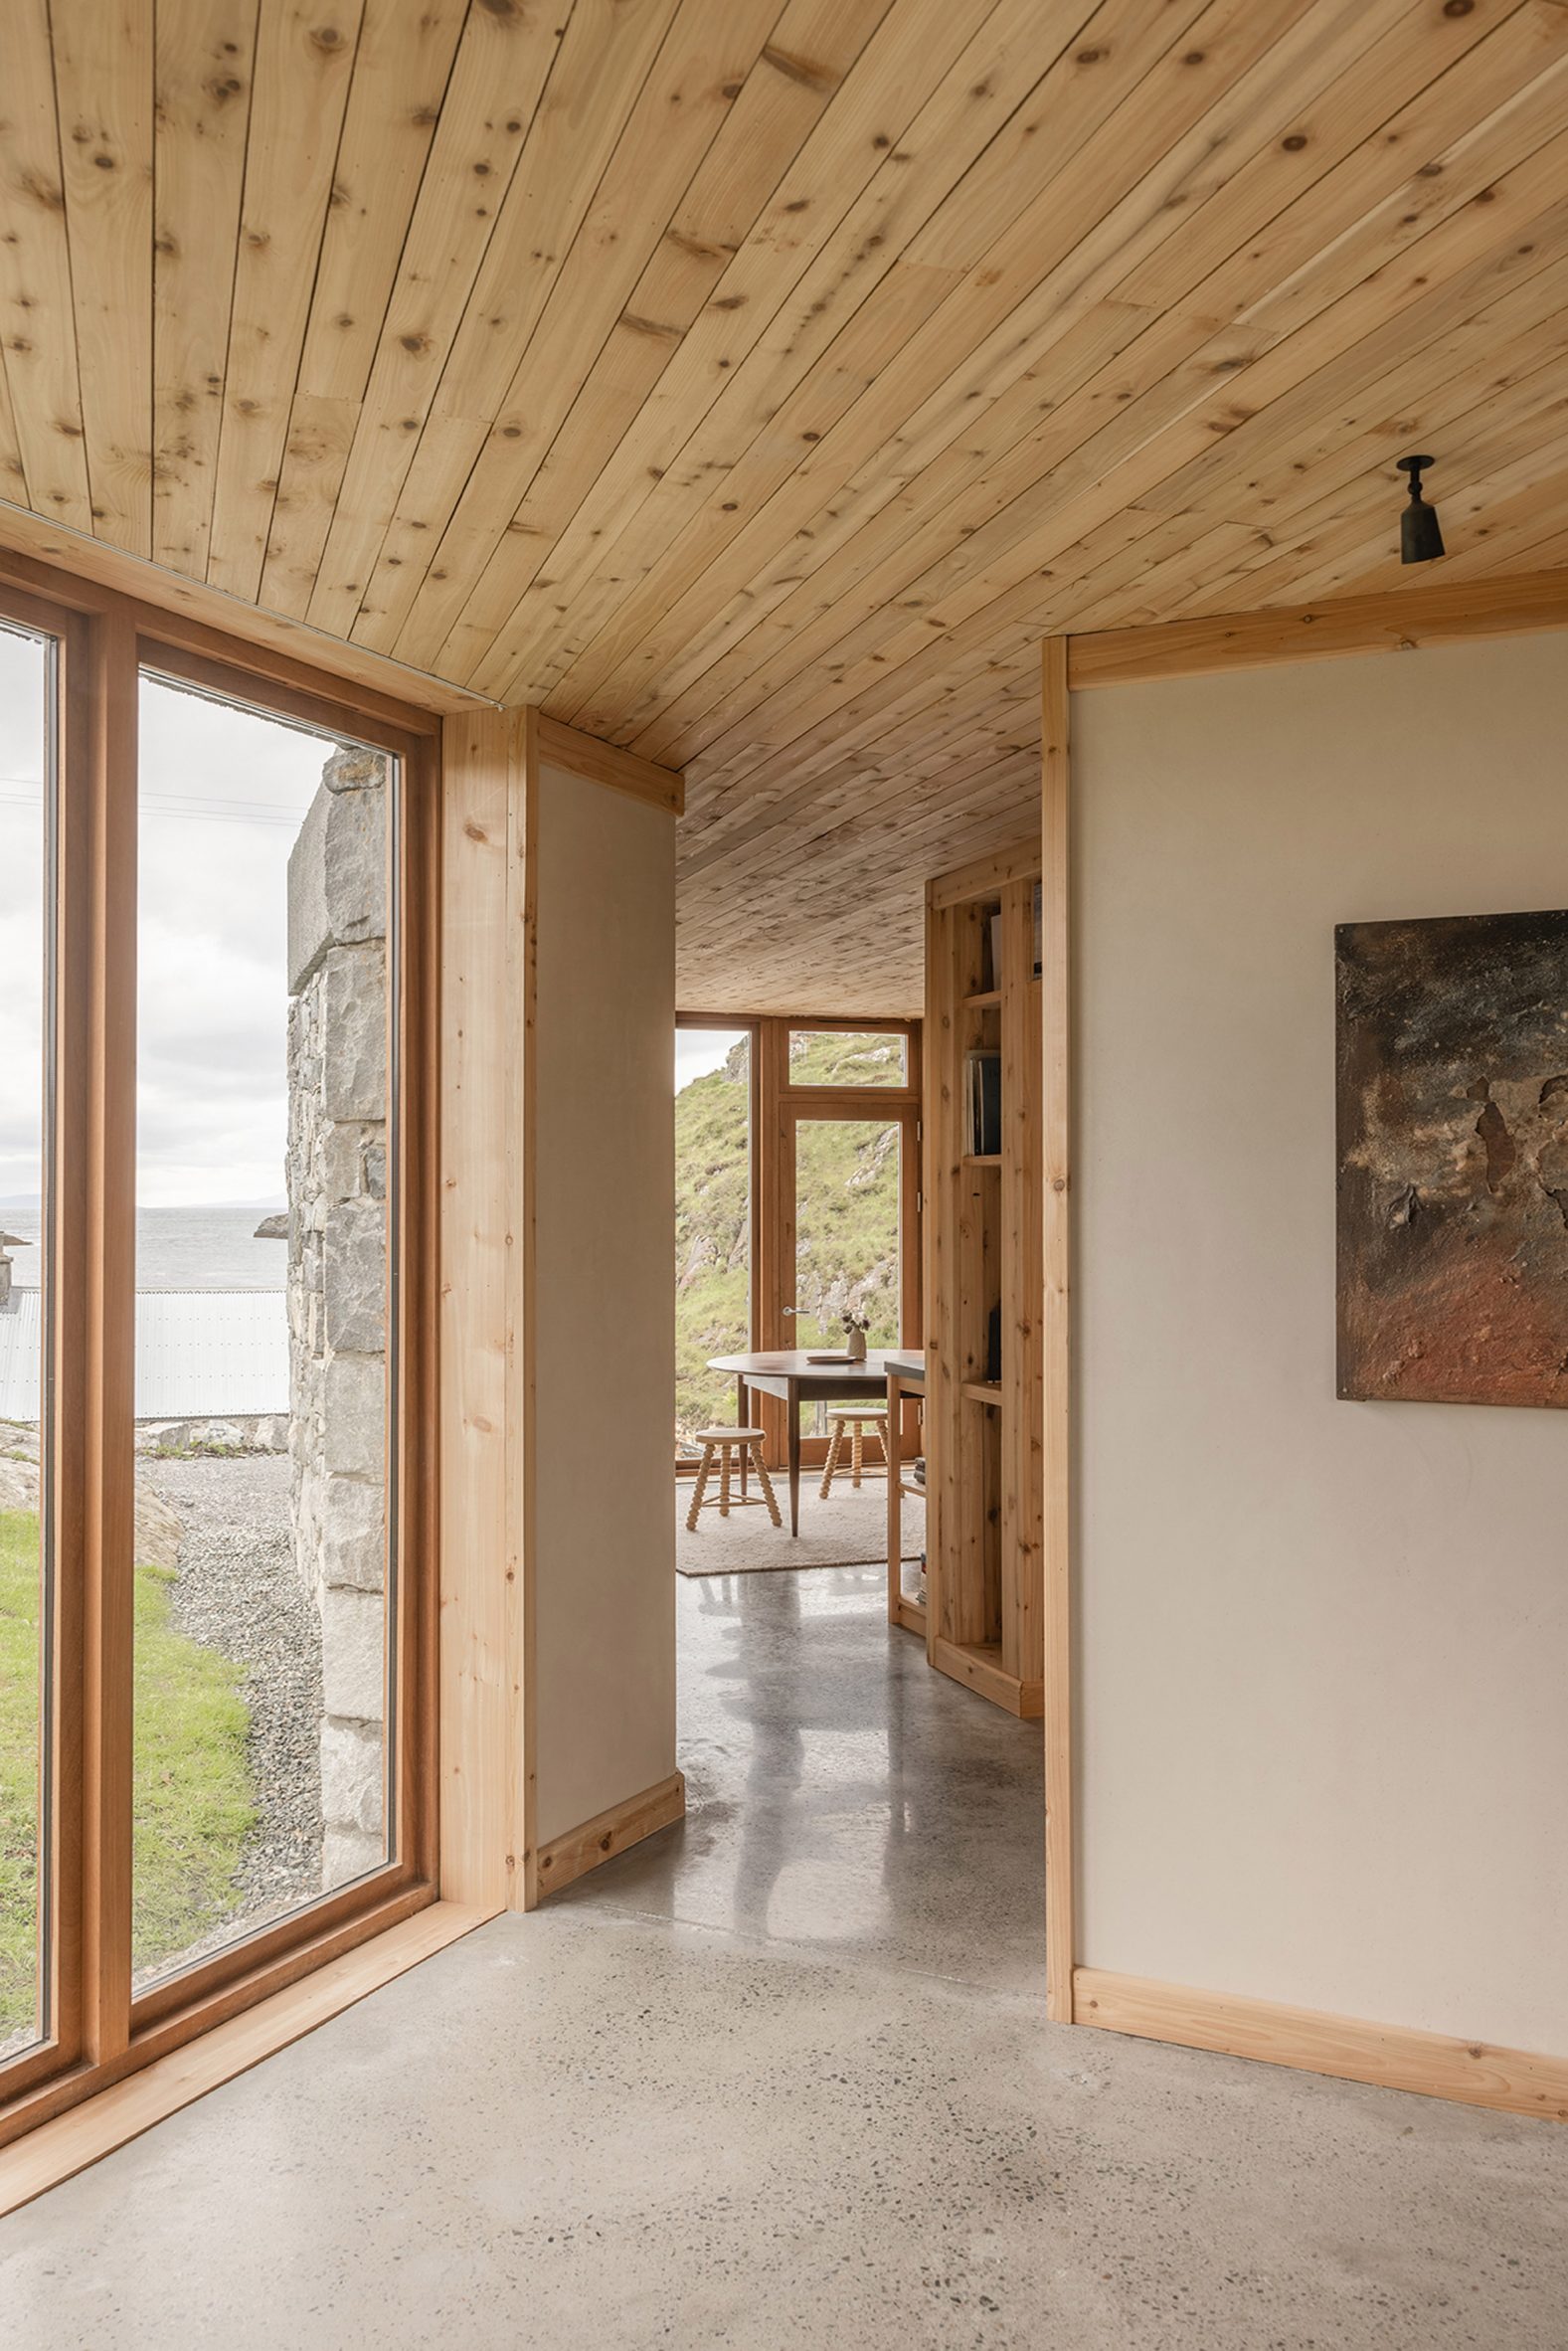 Timber-lined interior of a stone home in Scotland